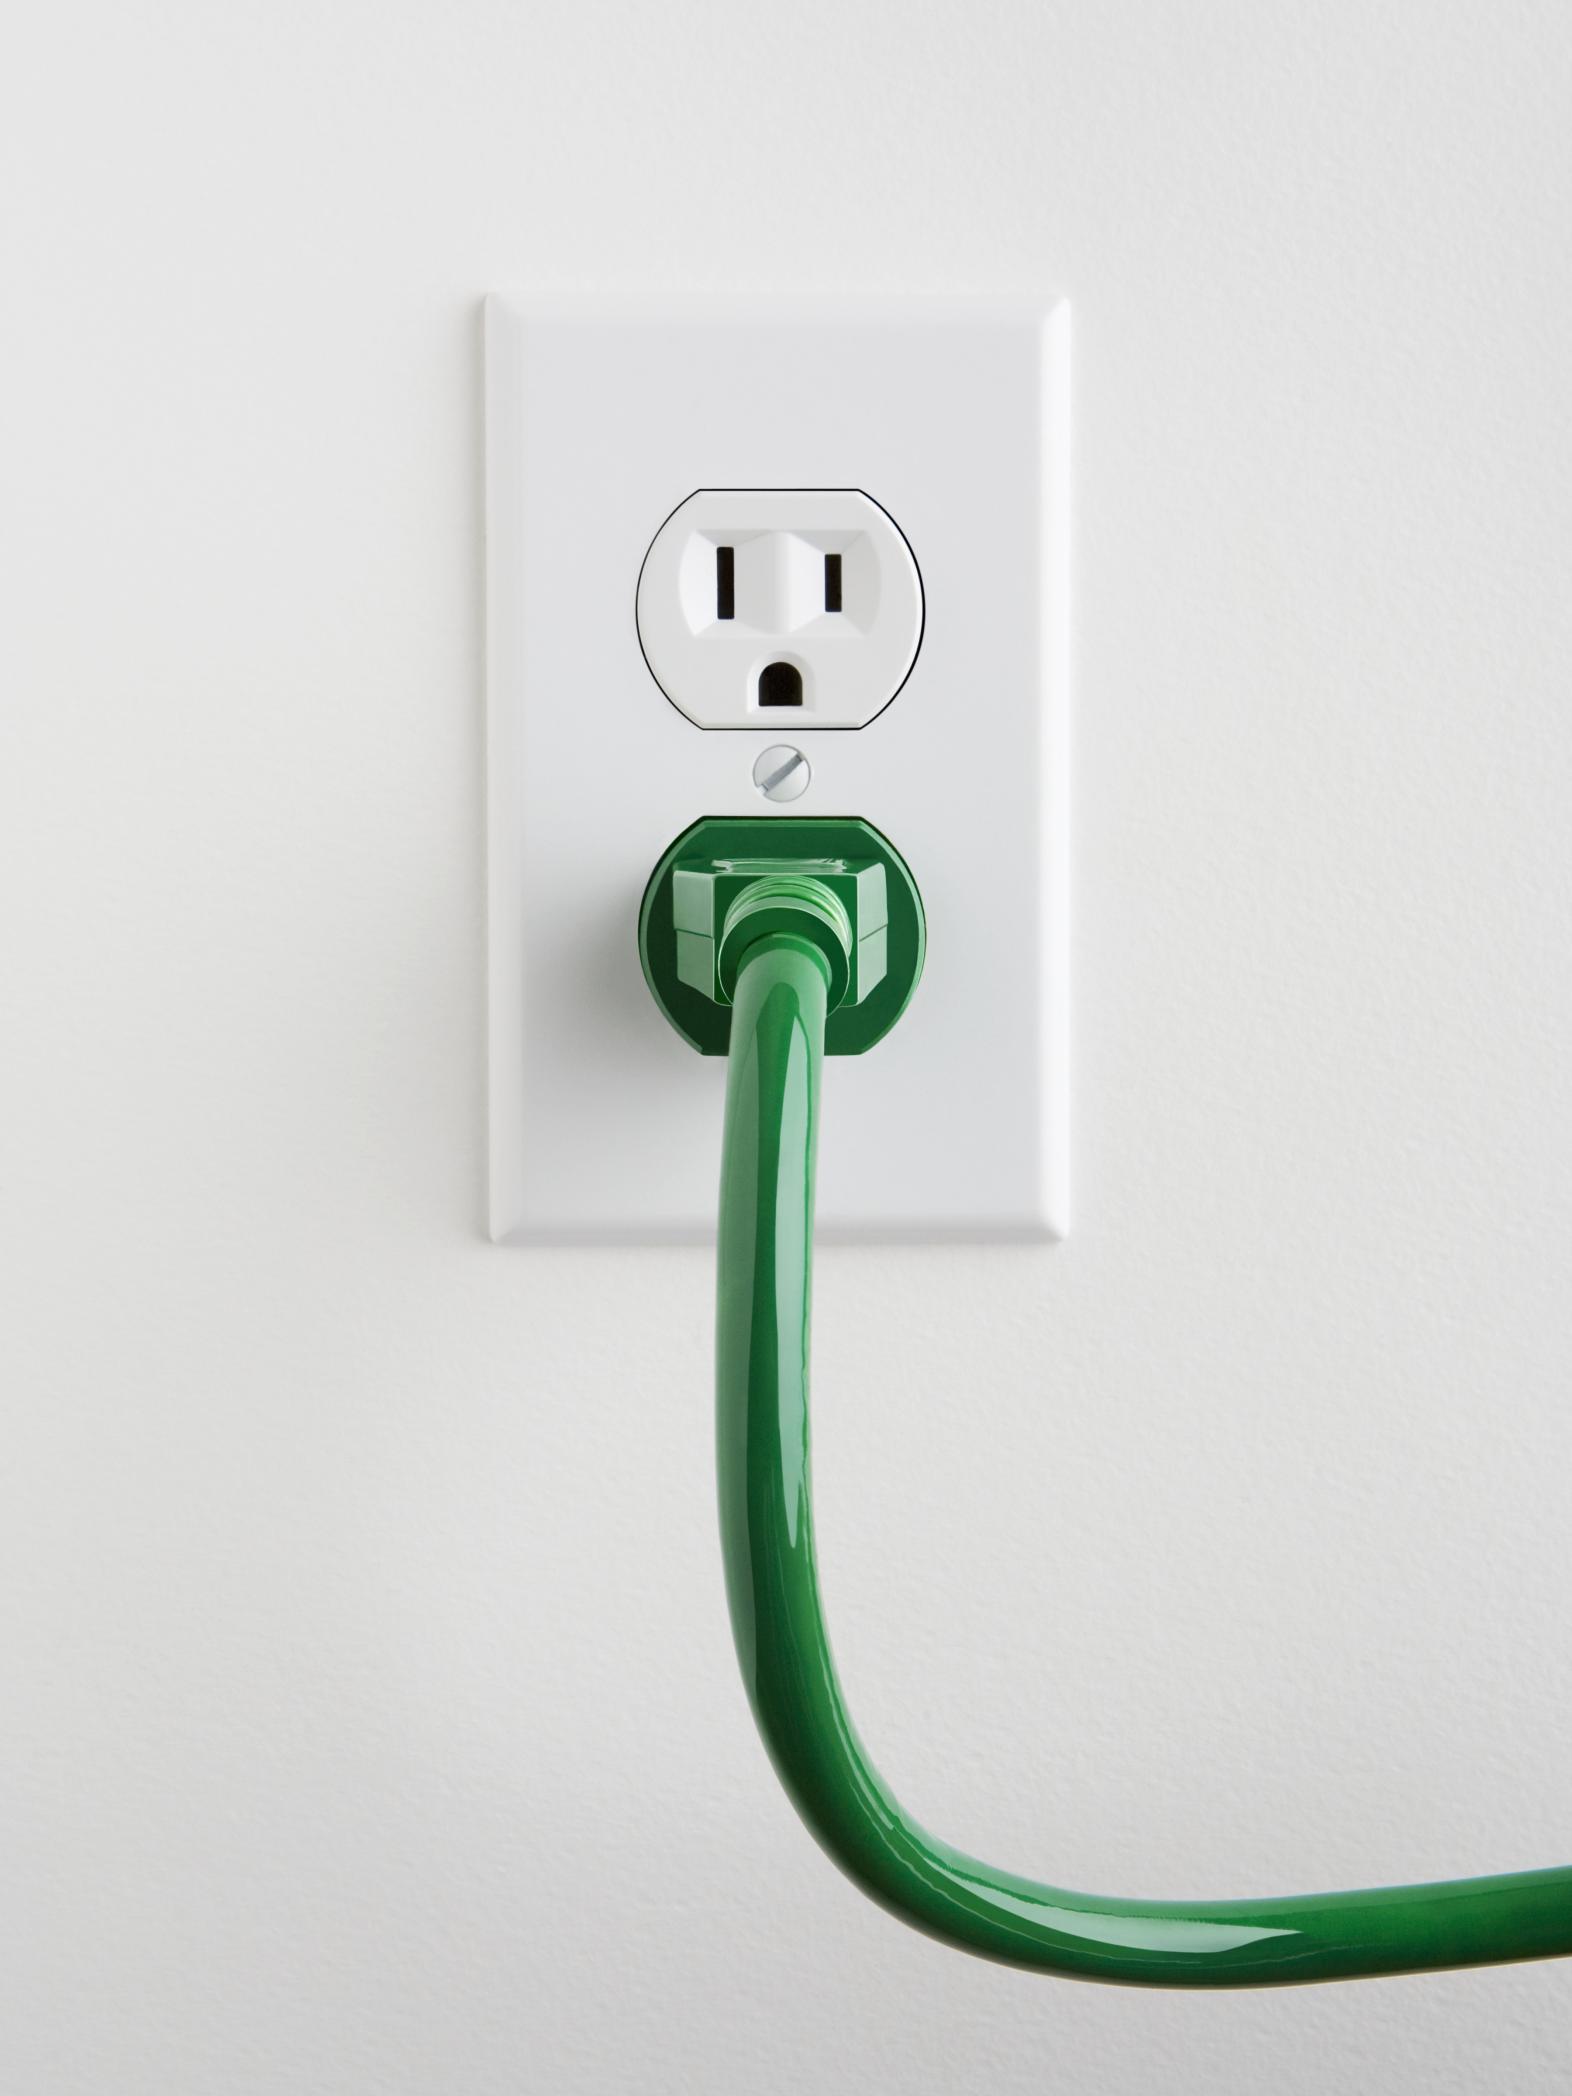 A plug inserted into a household outlet